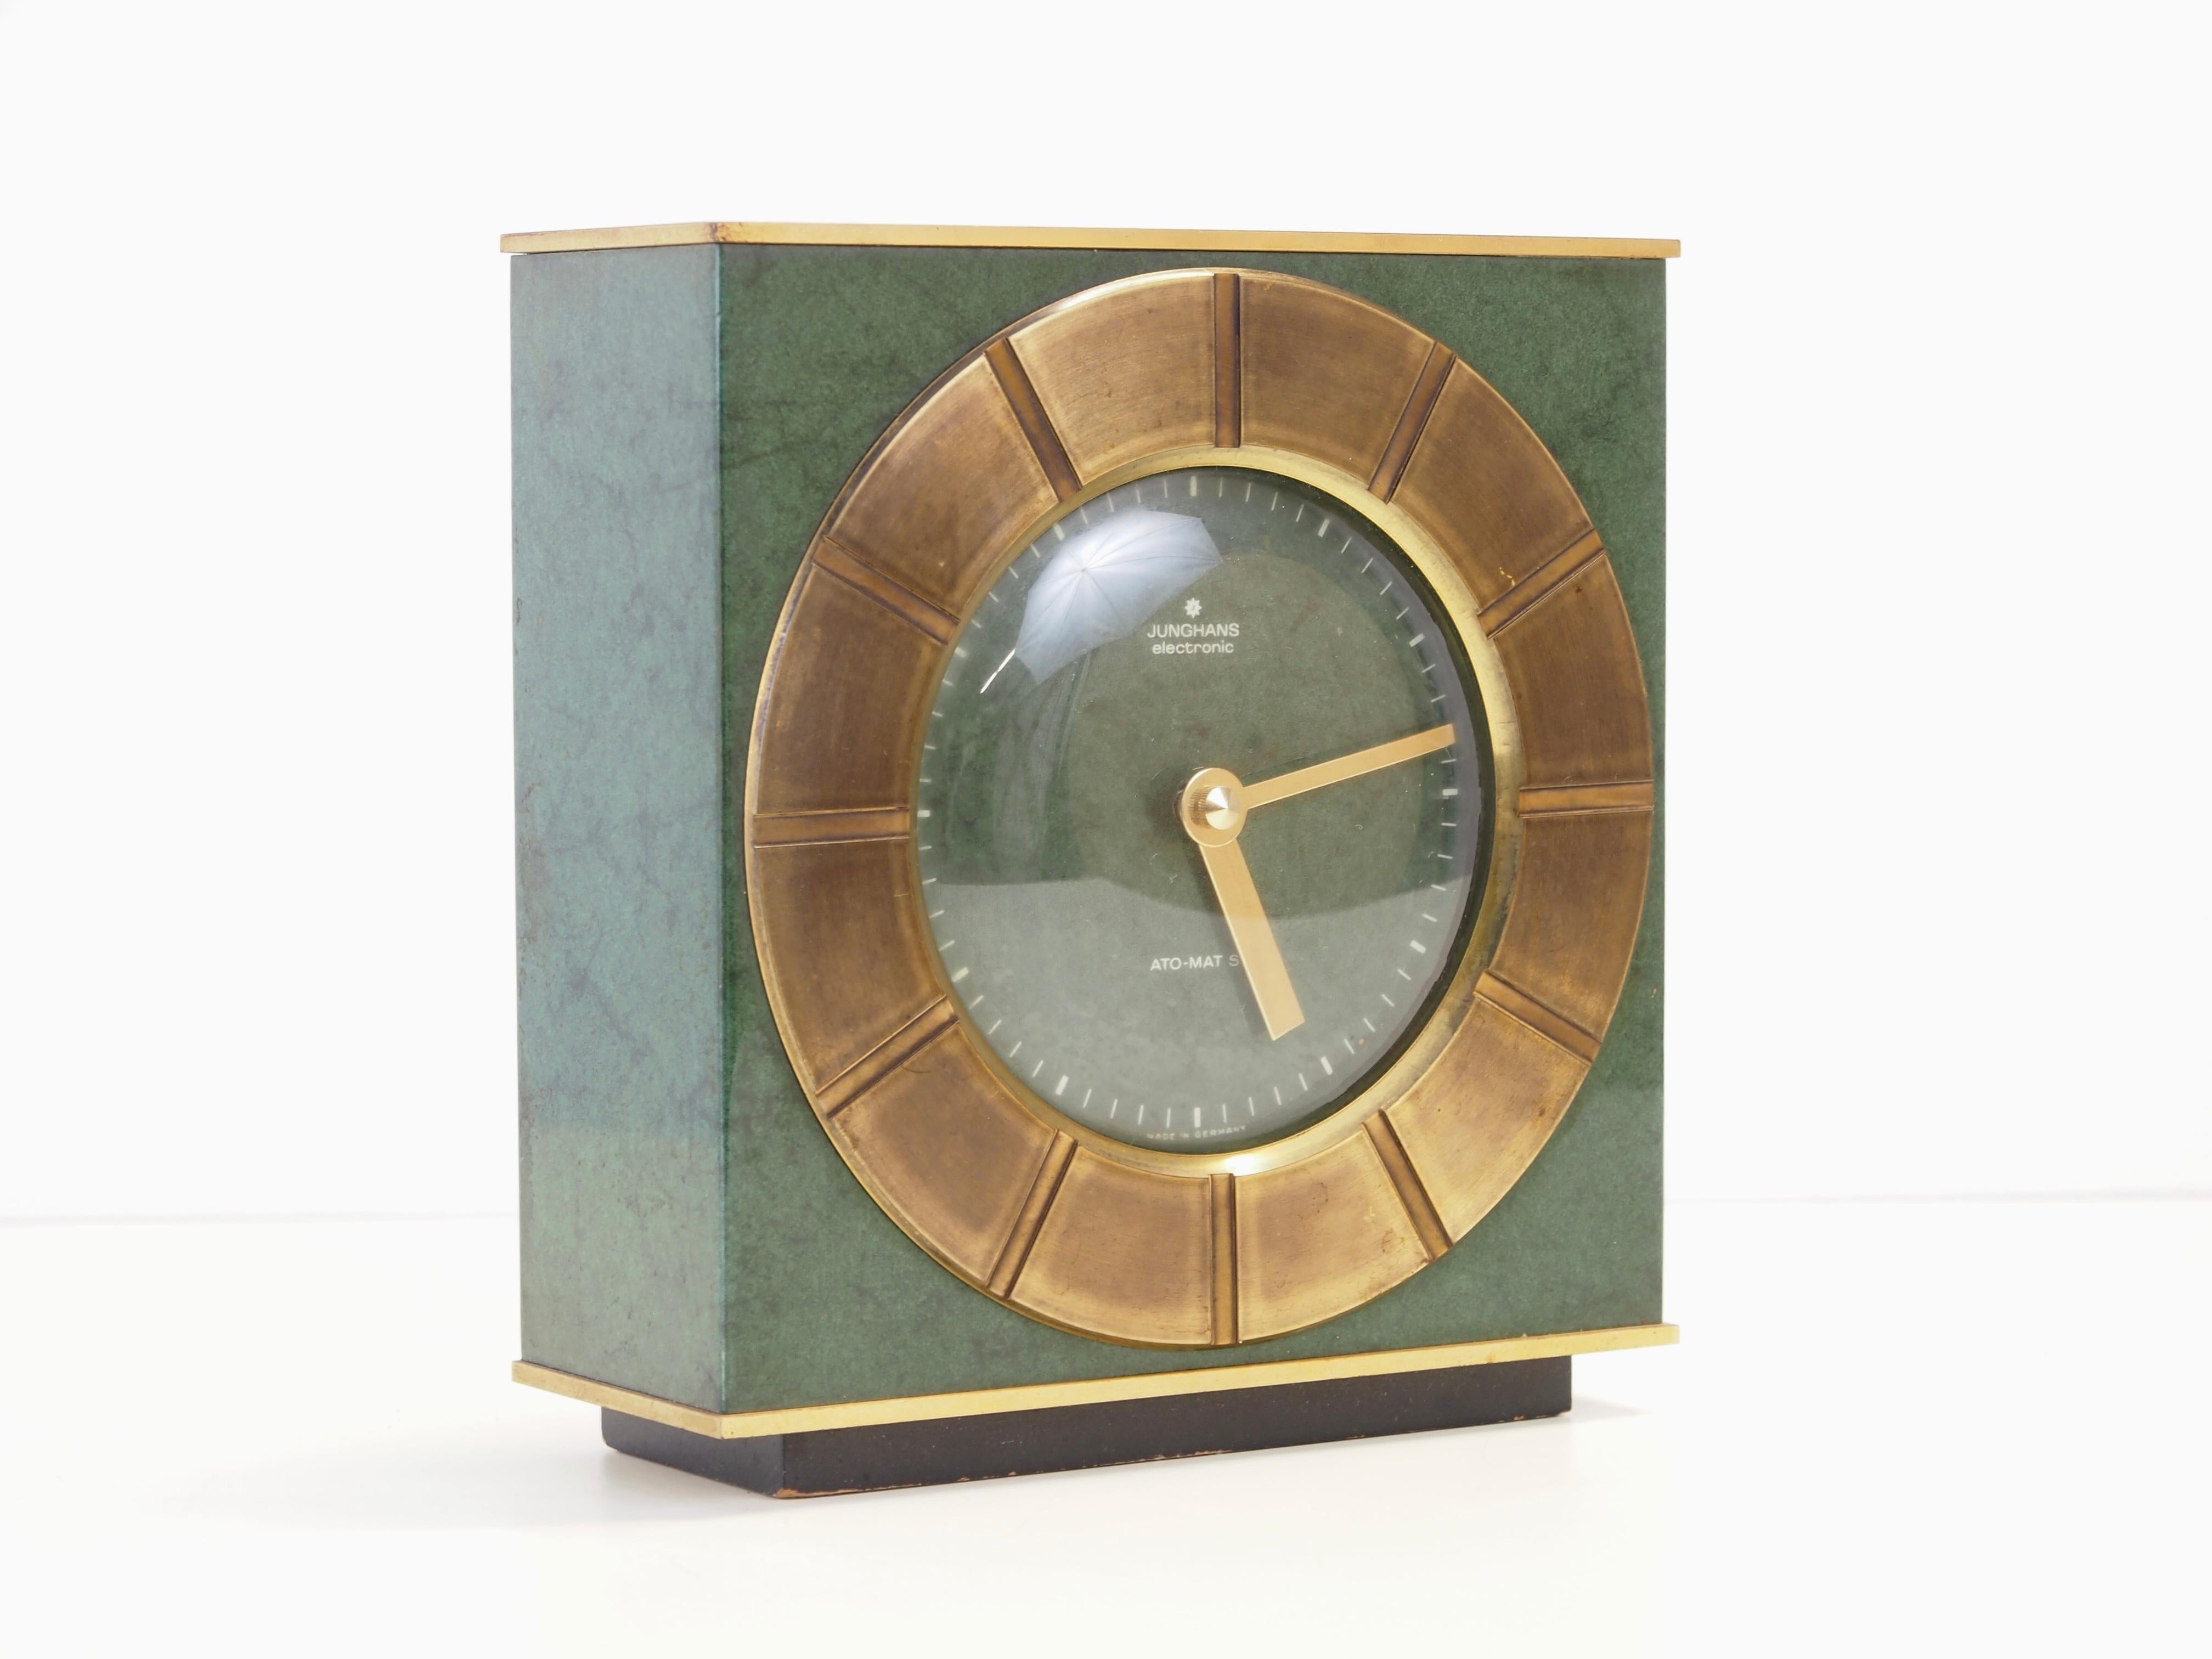 Stunning midcentury table clock made by Junghans Electronic German Clocks Manufacturer.

This rare and delicate table clock is made of solid brass green enameled plates in the 1950s or 1960s of the former century. It has a precise early electronic